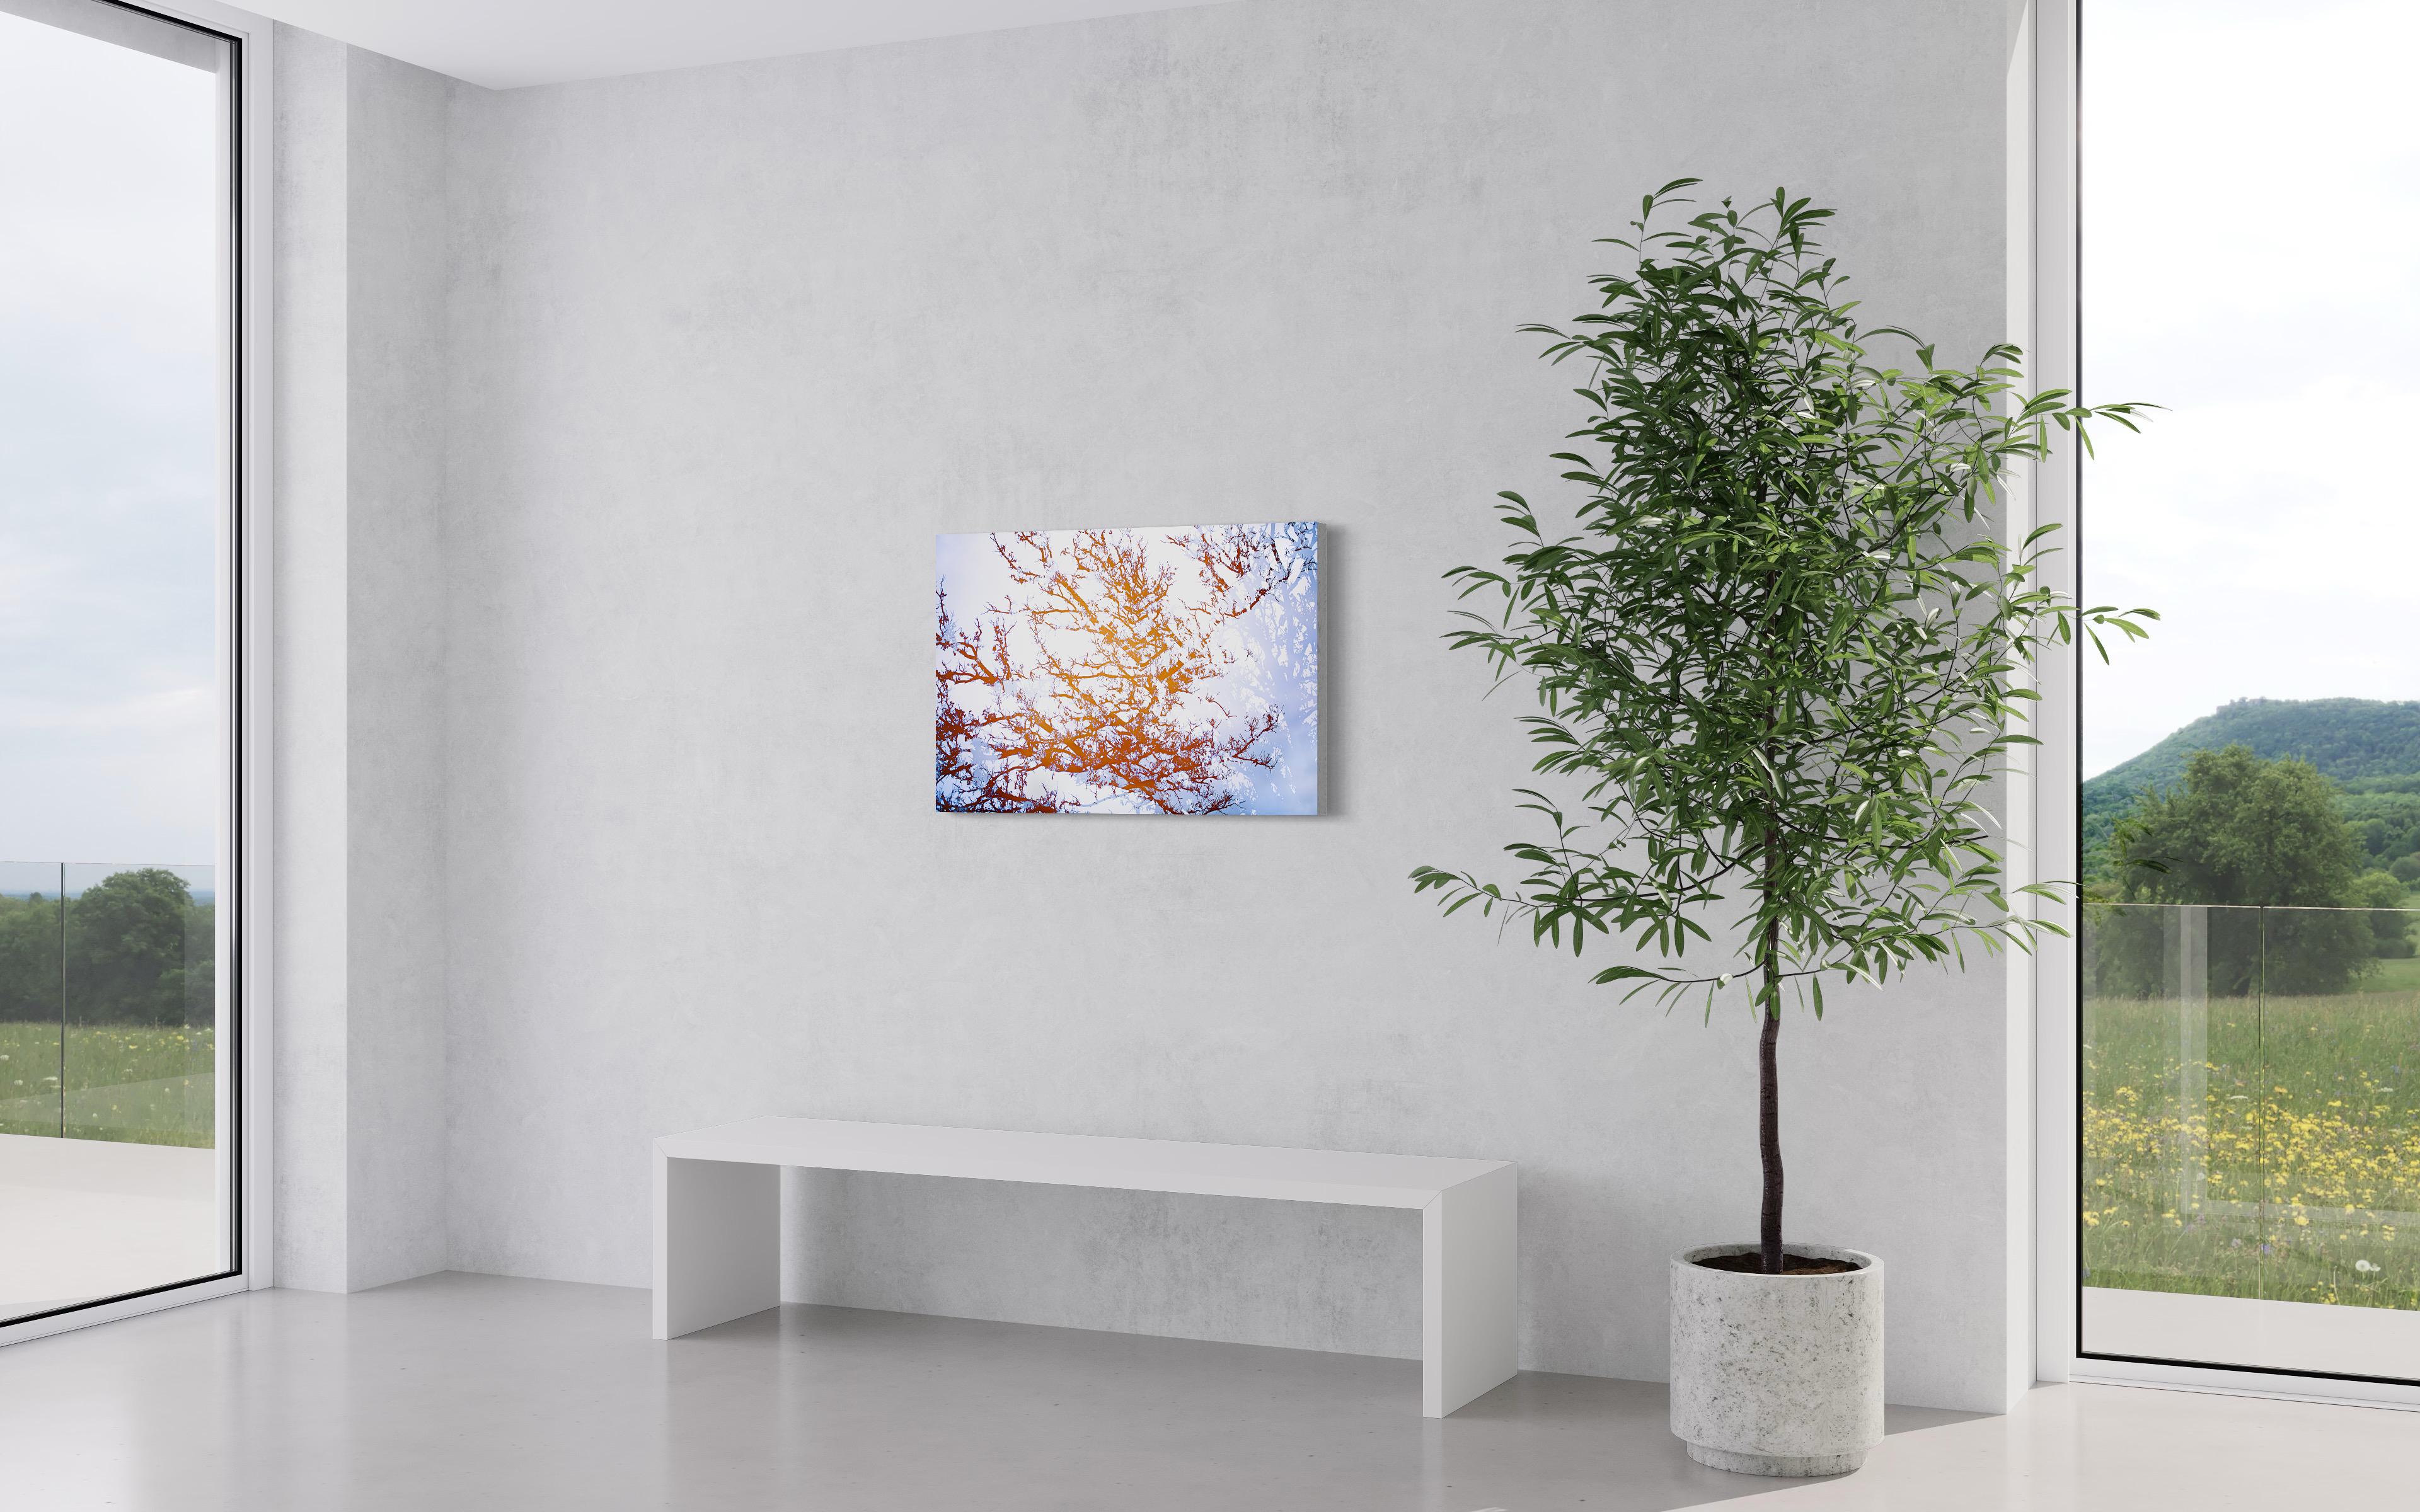 This contemporary photograph by Tori Gagne captures an abstracted view of tree branches, with a contrasting palette of light blue-lavender and warm, deep orange. An edition size of 25, this photograph is available as a metal sublimation print with a